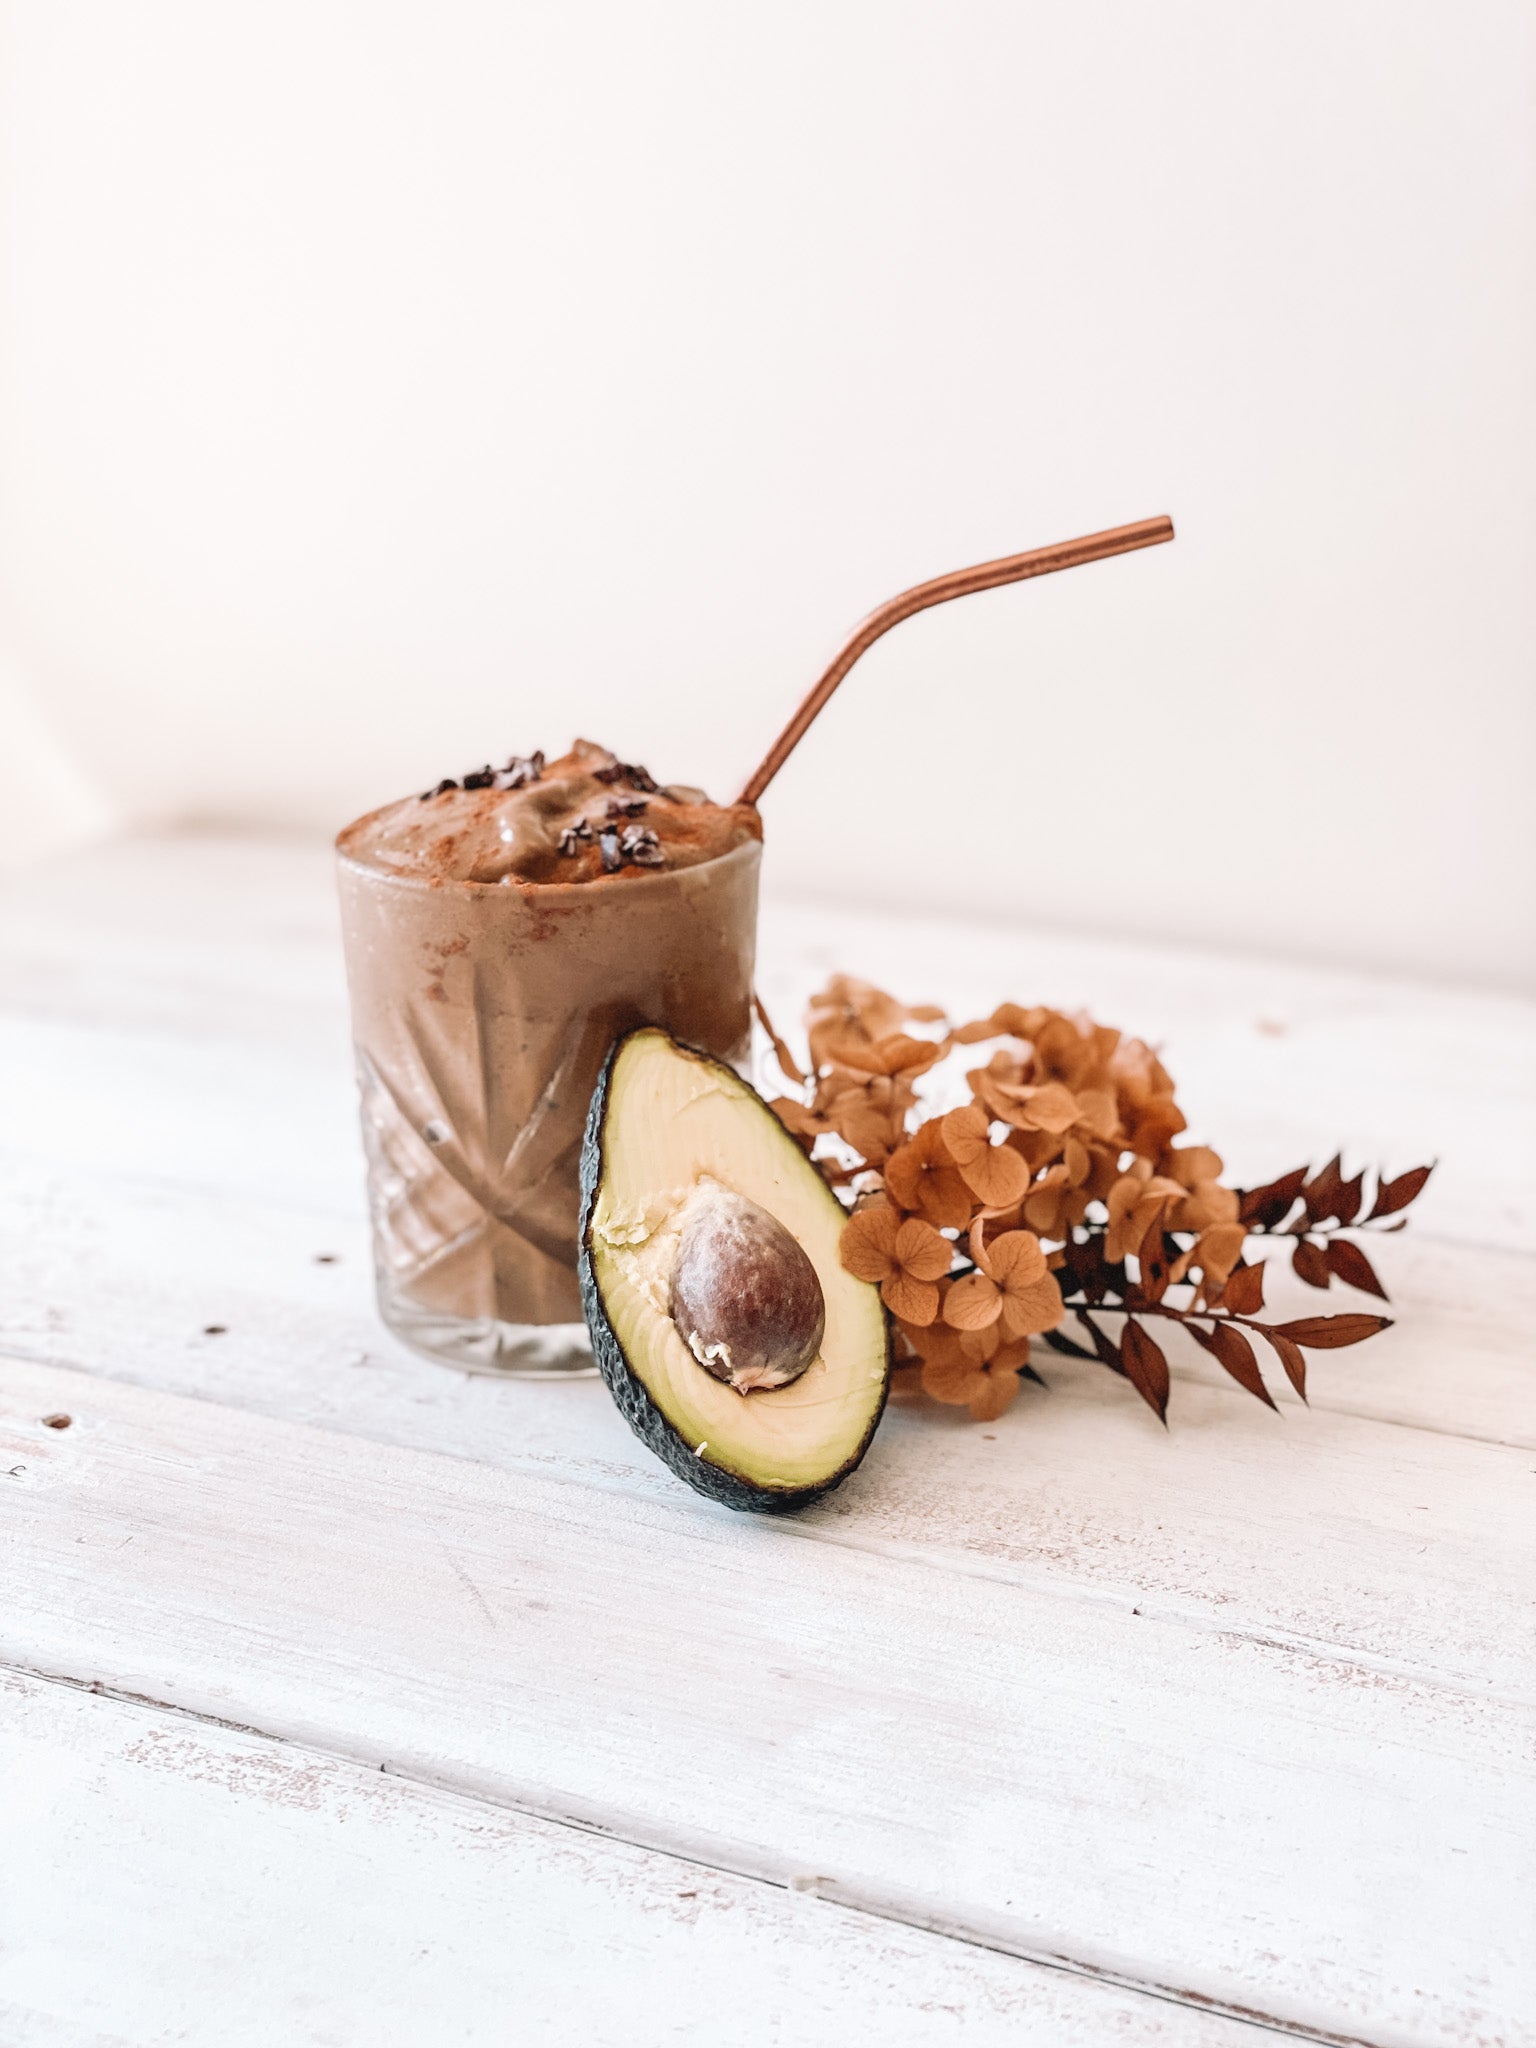 Kick Start Your Morning With This Energising Chocolate Smoothie